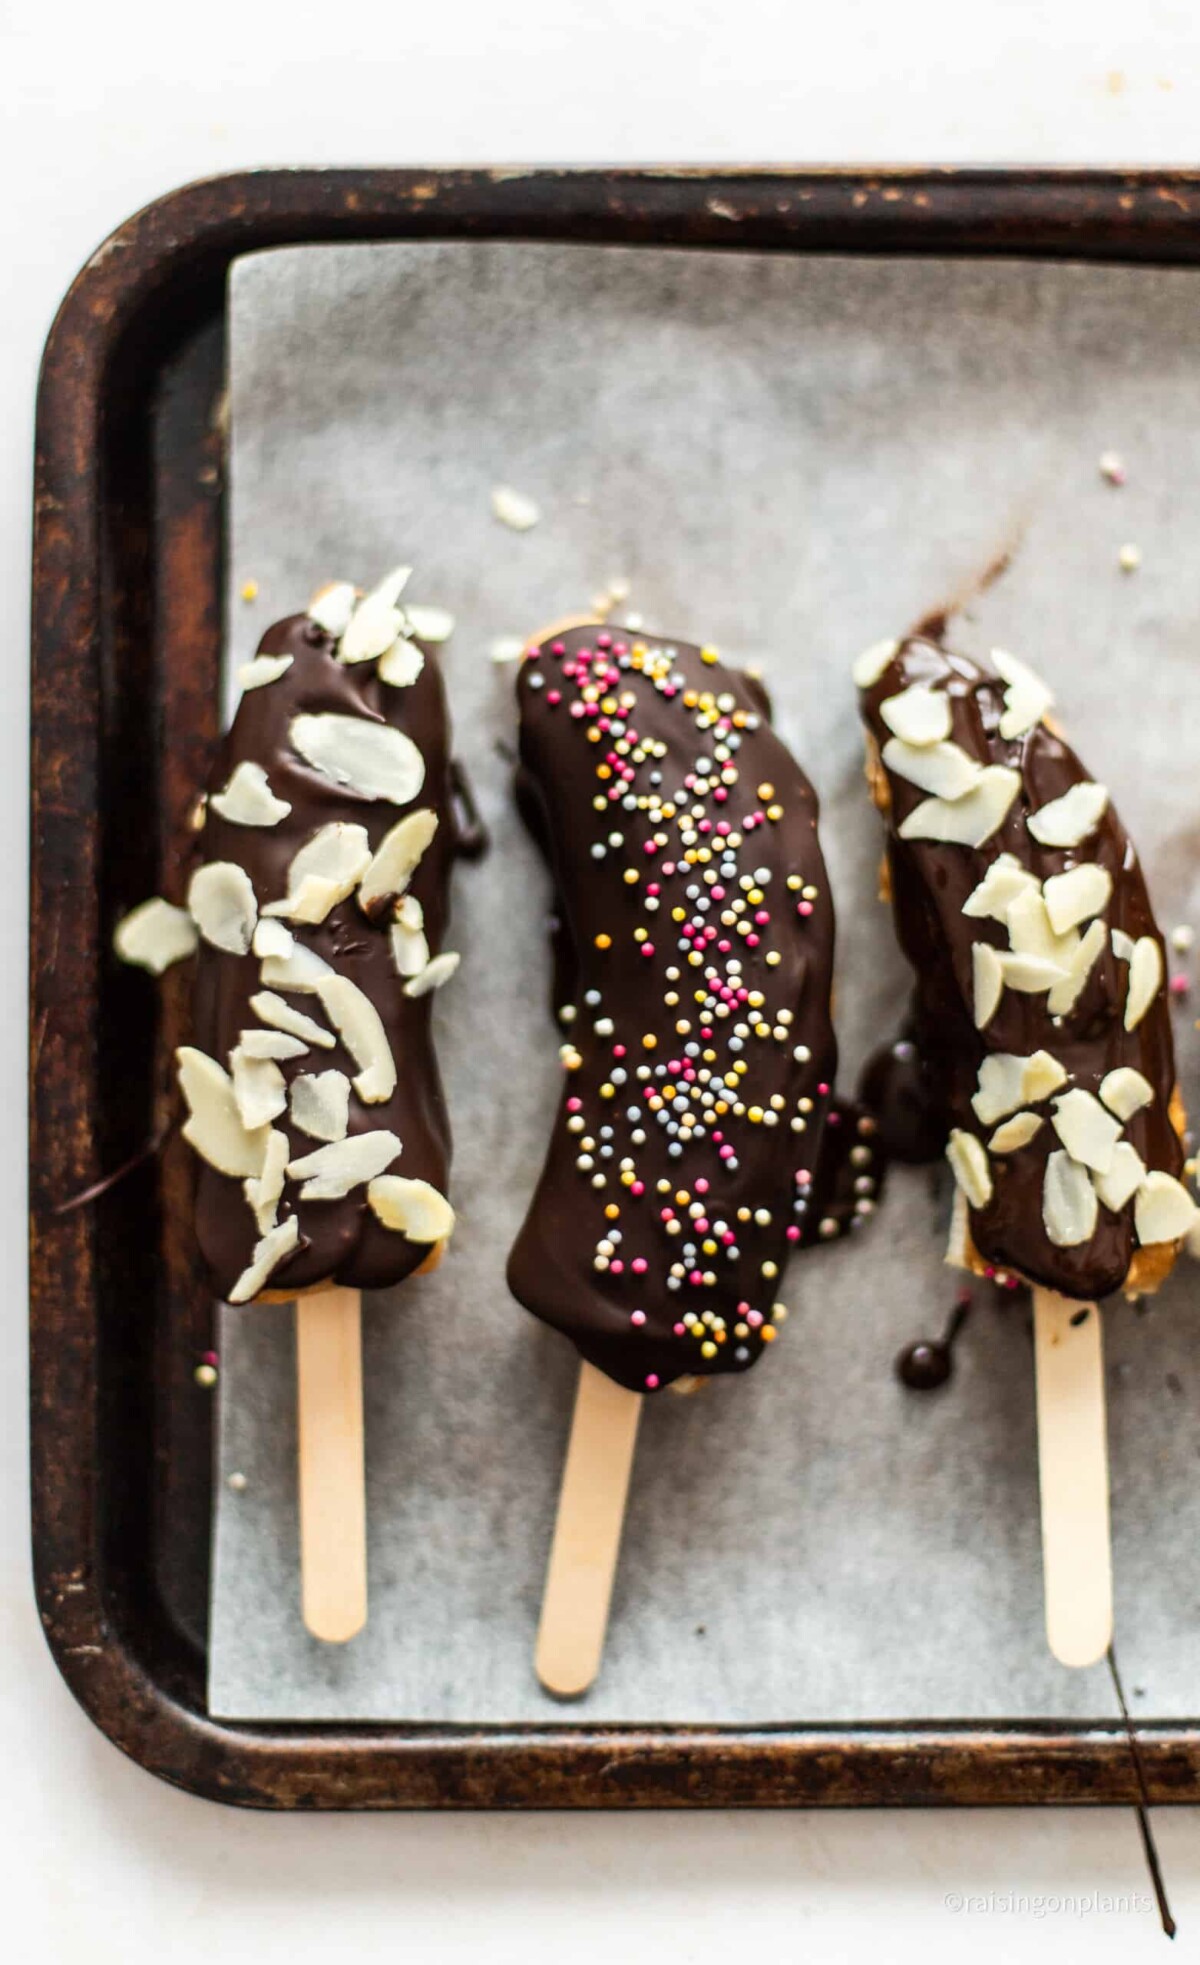 Three chocolate coated banana lollies on a baking tray lined with baking paper.